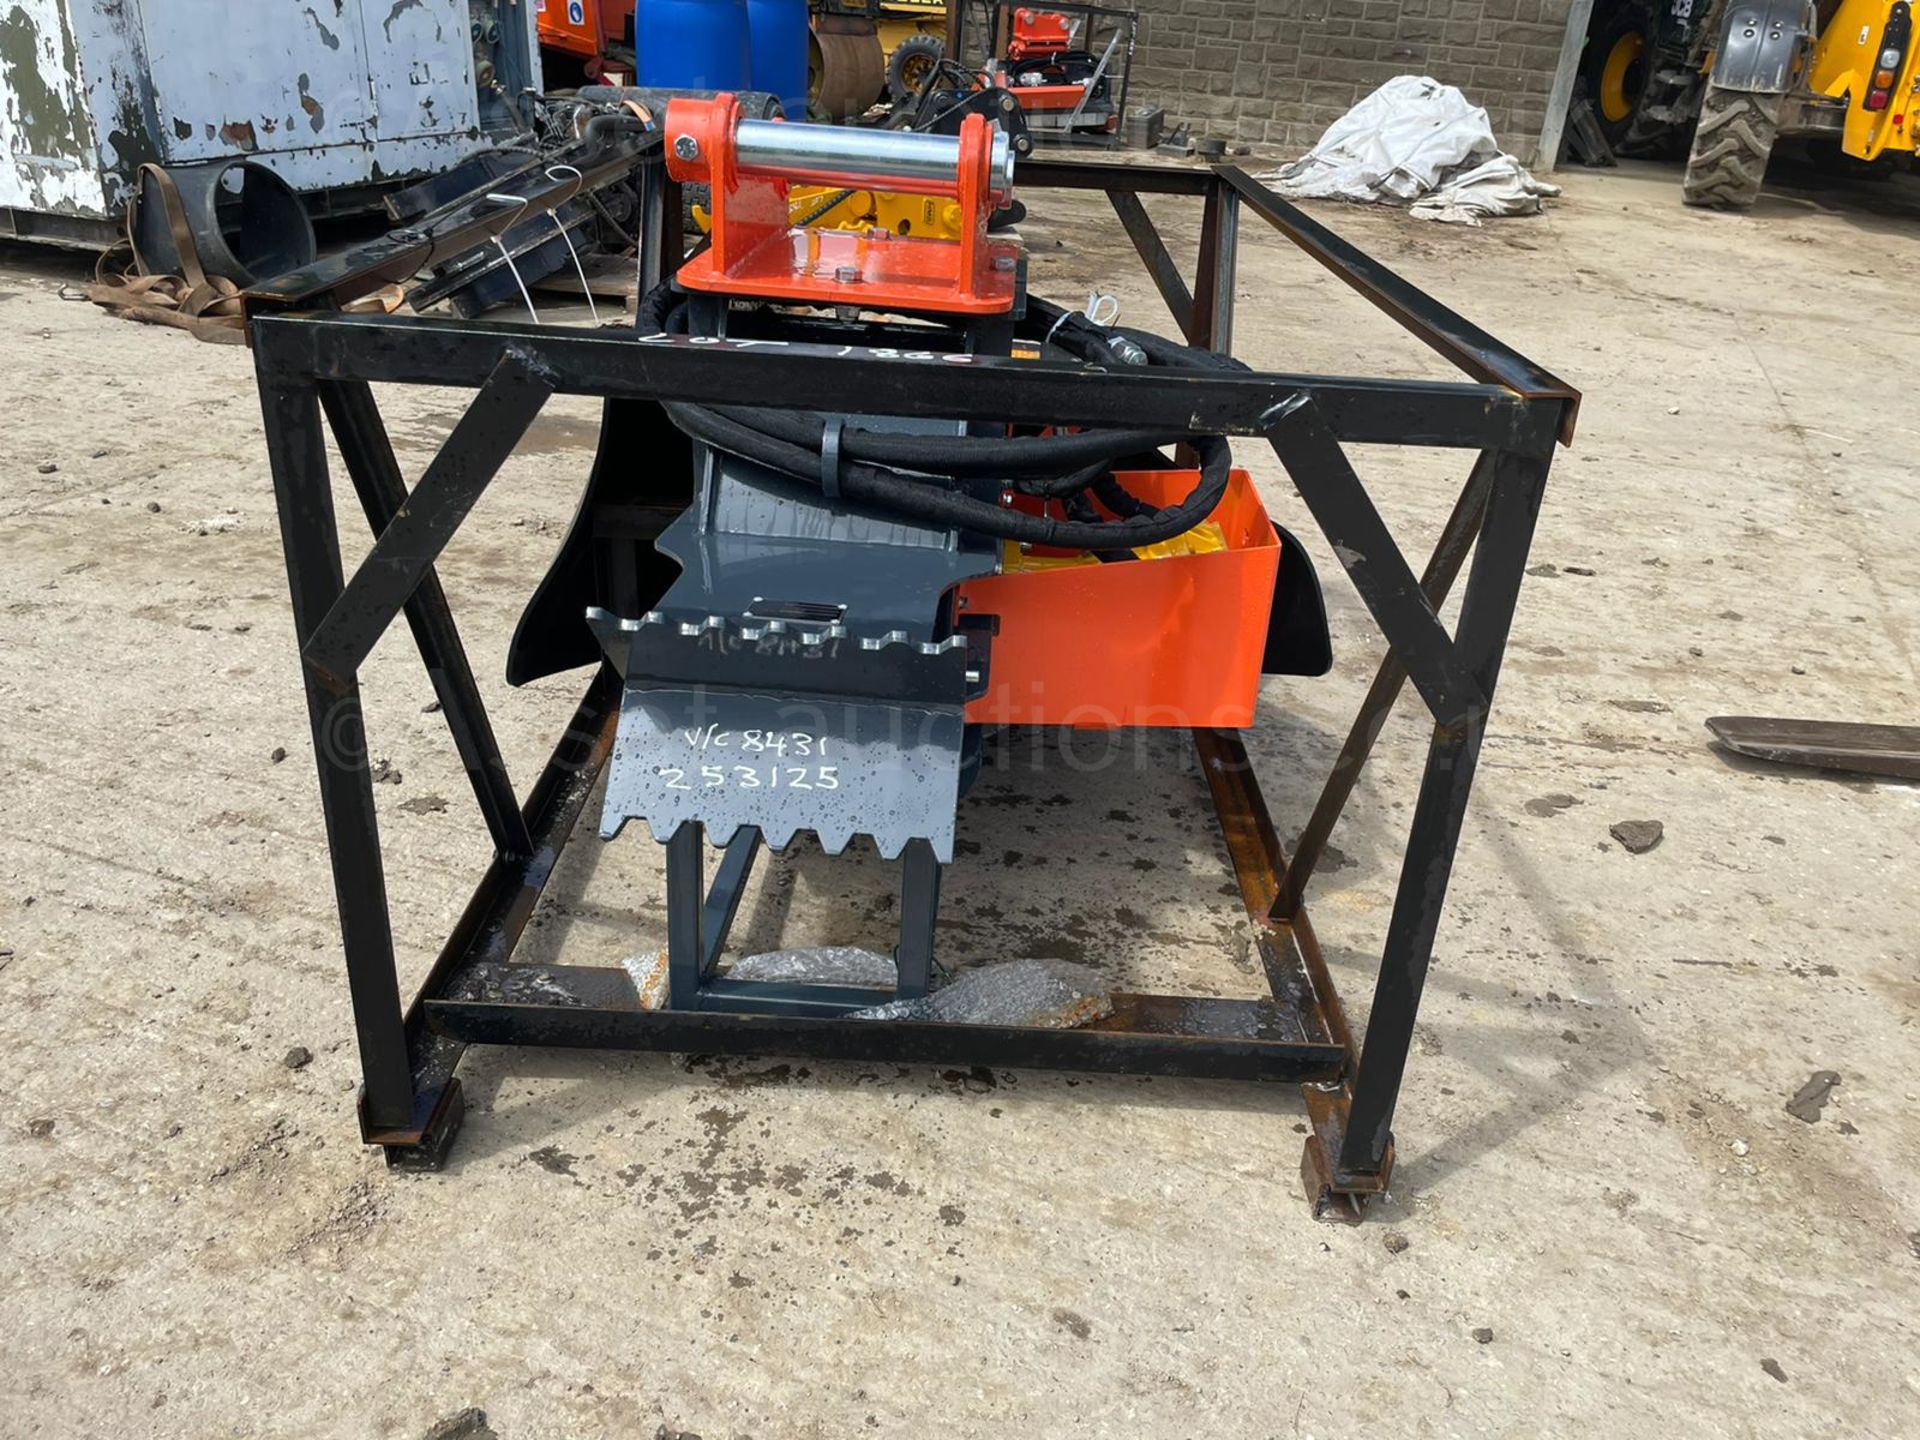 NEW AND UNUSED HEAVY DUTY 18" STUMP GRINDER, HYDRAULIC DRIVEN, 50mm PINS *PLUS VAT* - Image 5 of 8